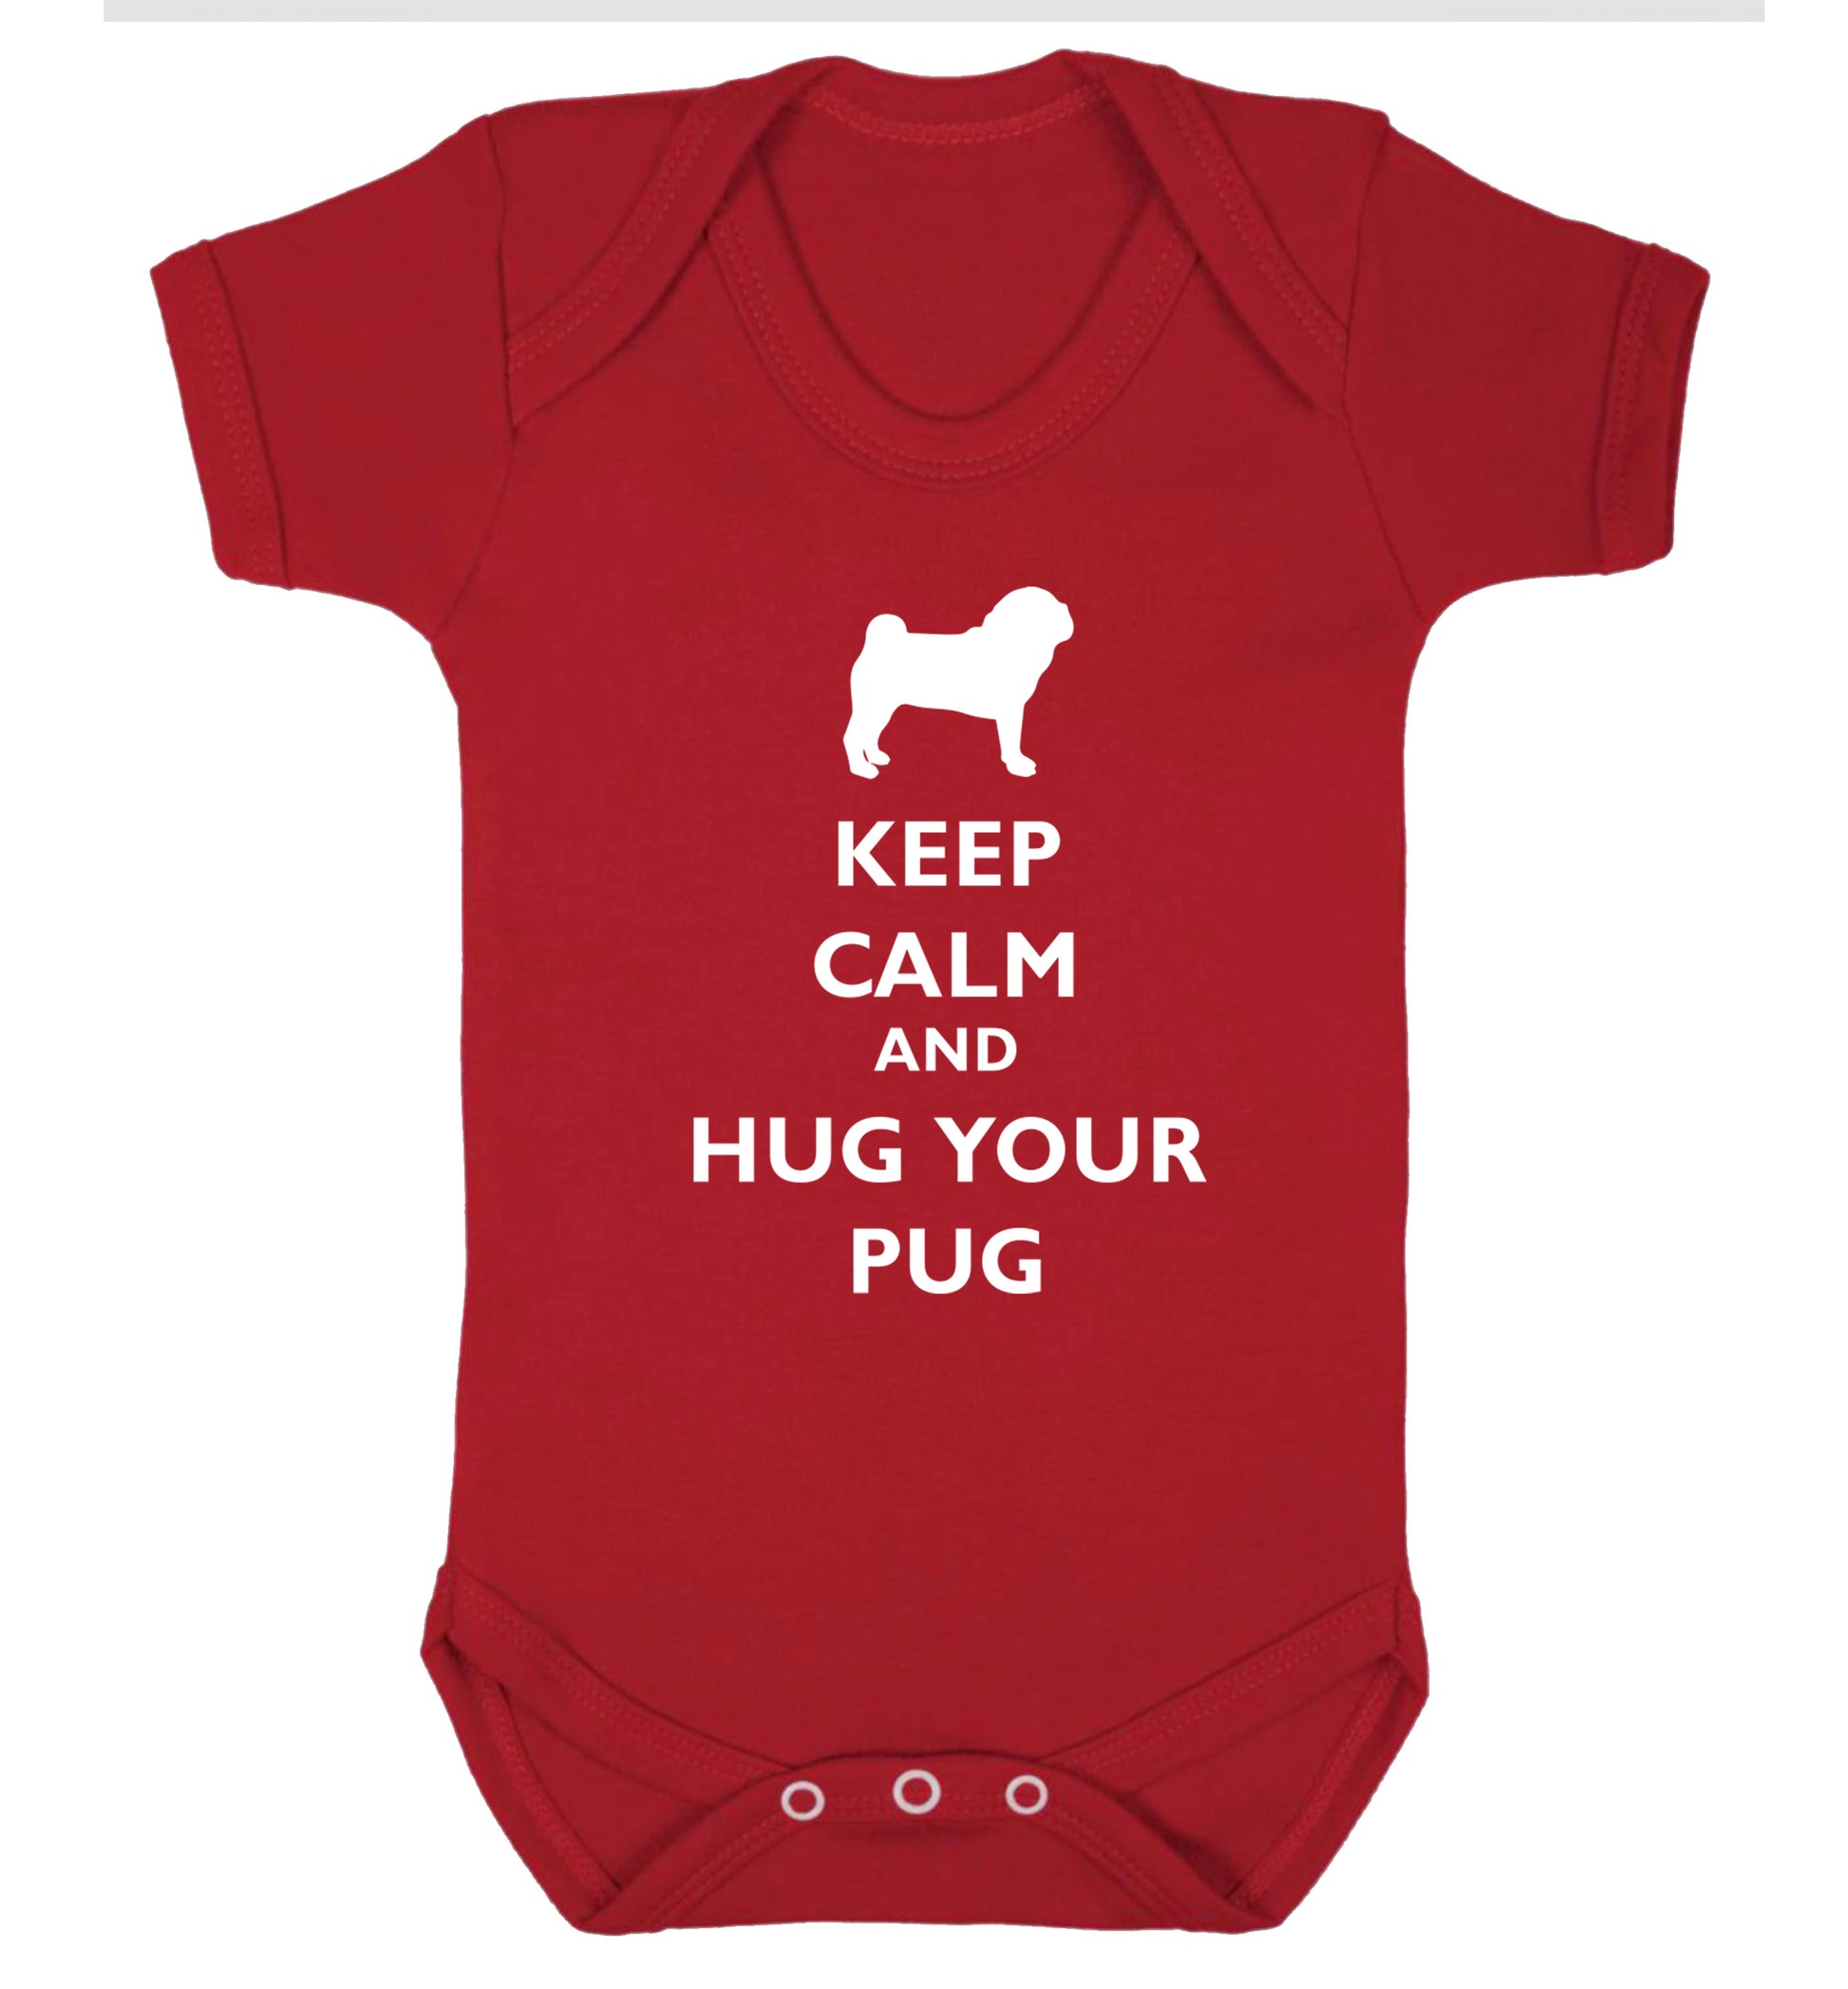 Keep calm and hug your pug Baby Vest red 18-24 months